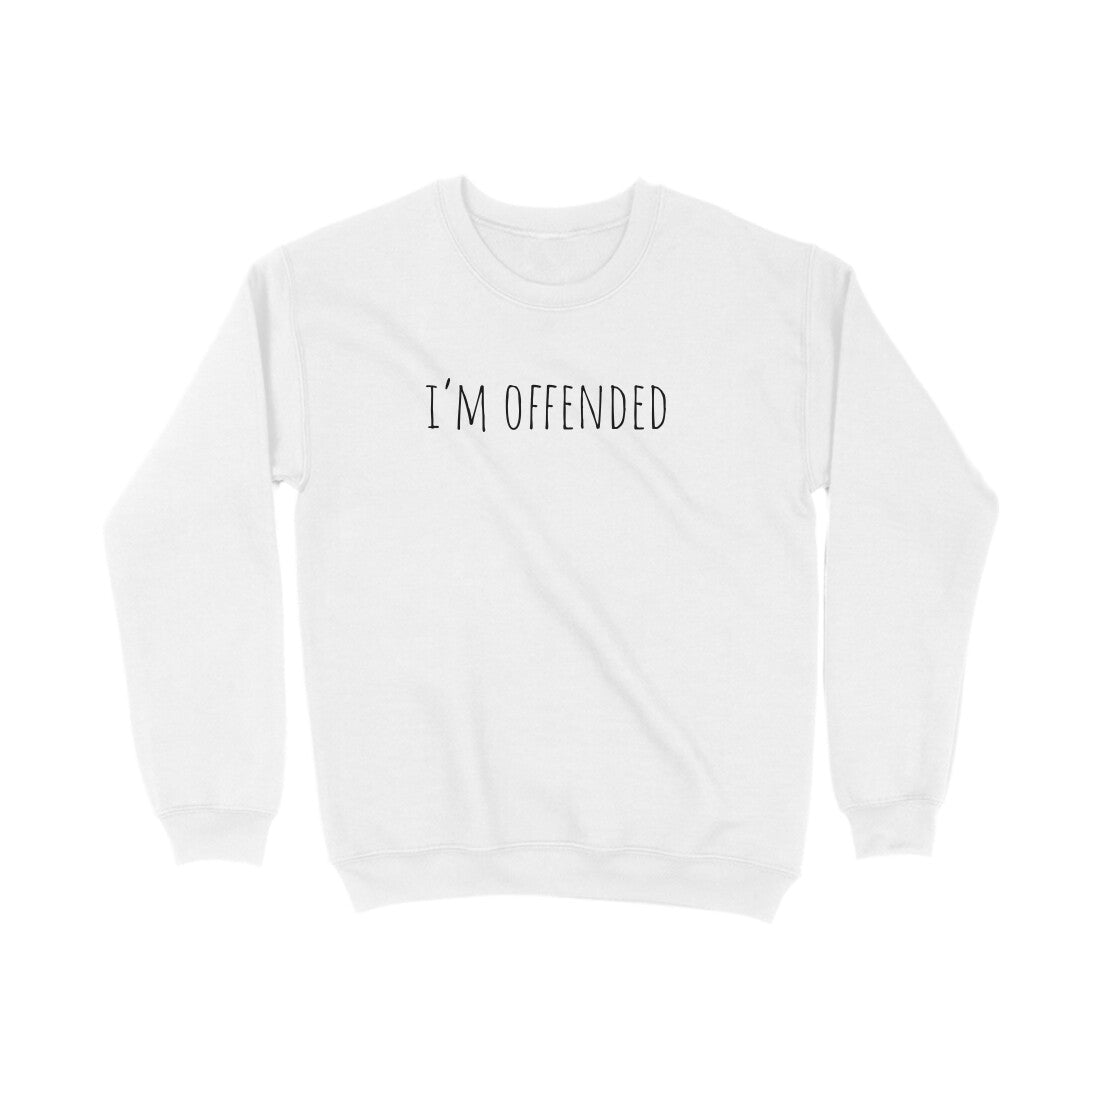 I'm Offended - Sweatshirt The Mean Indian Store